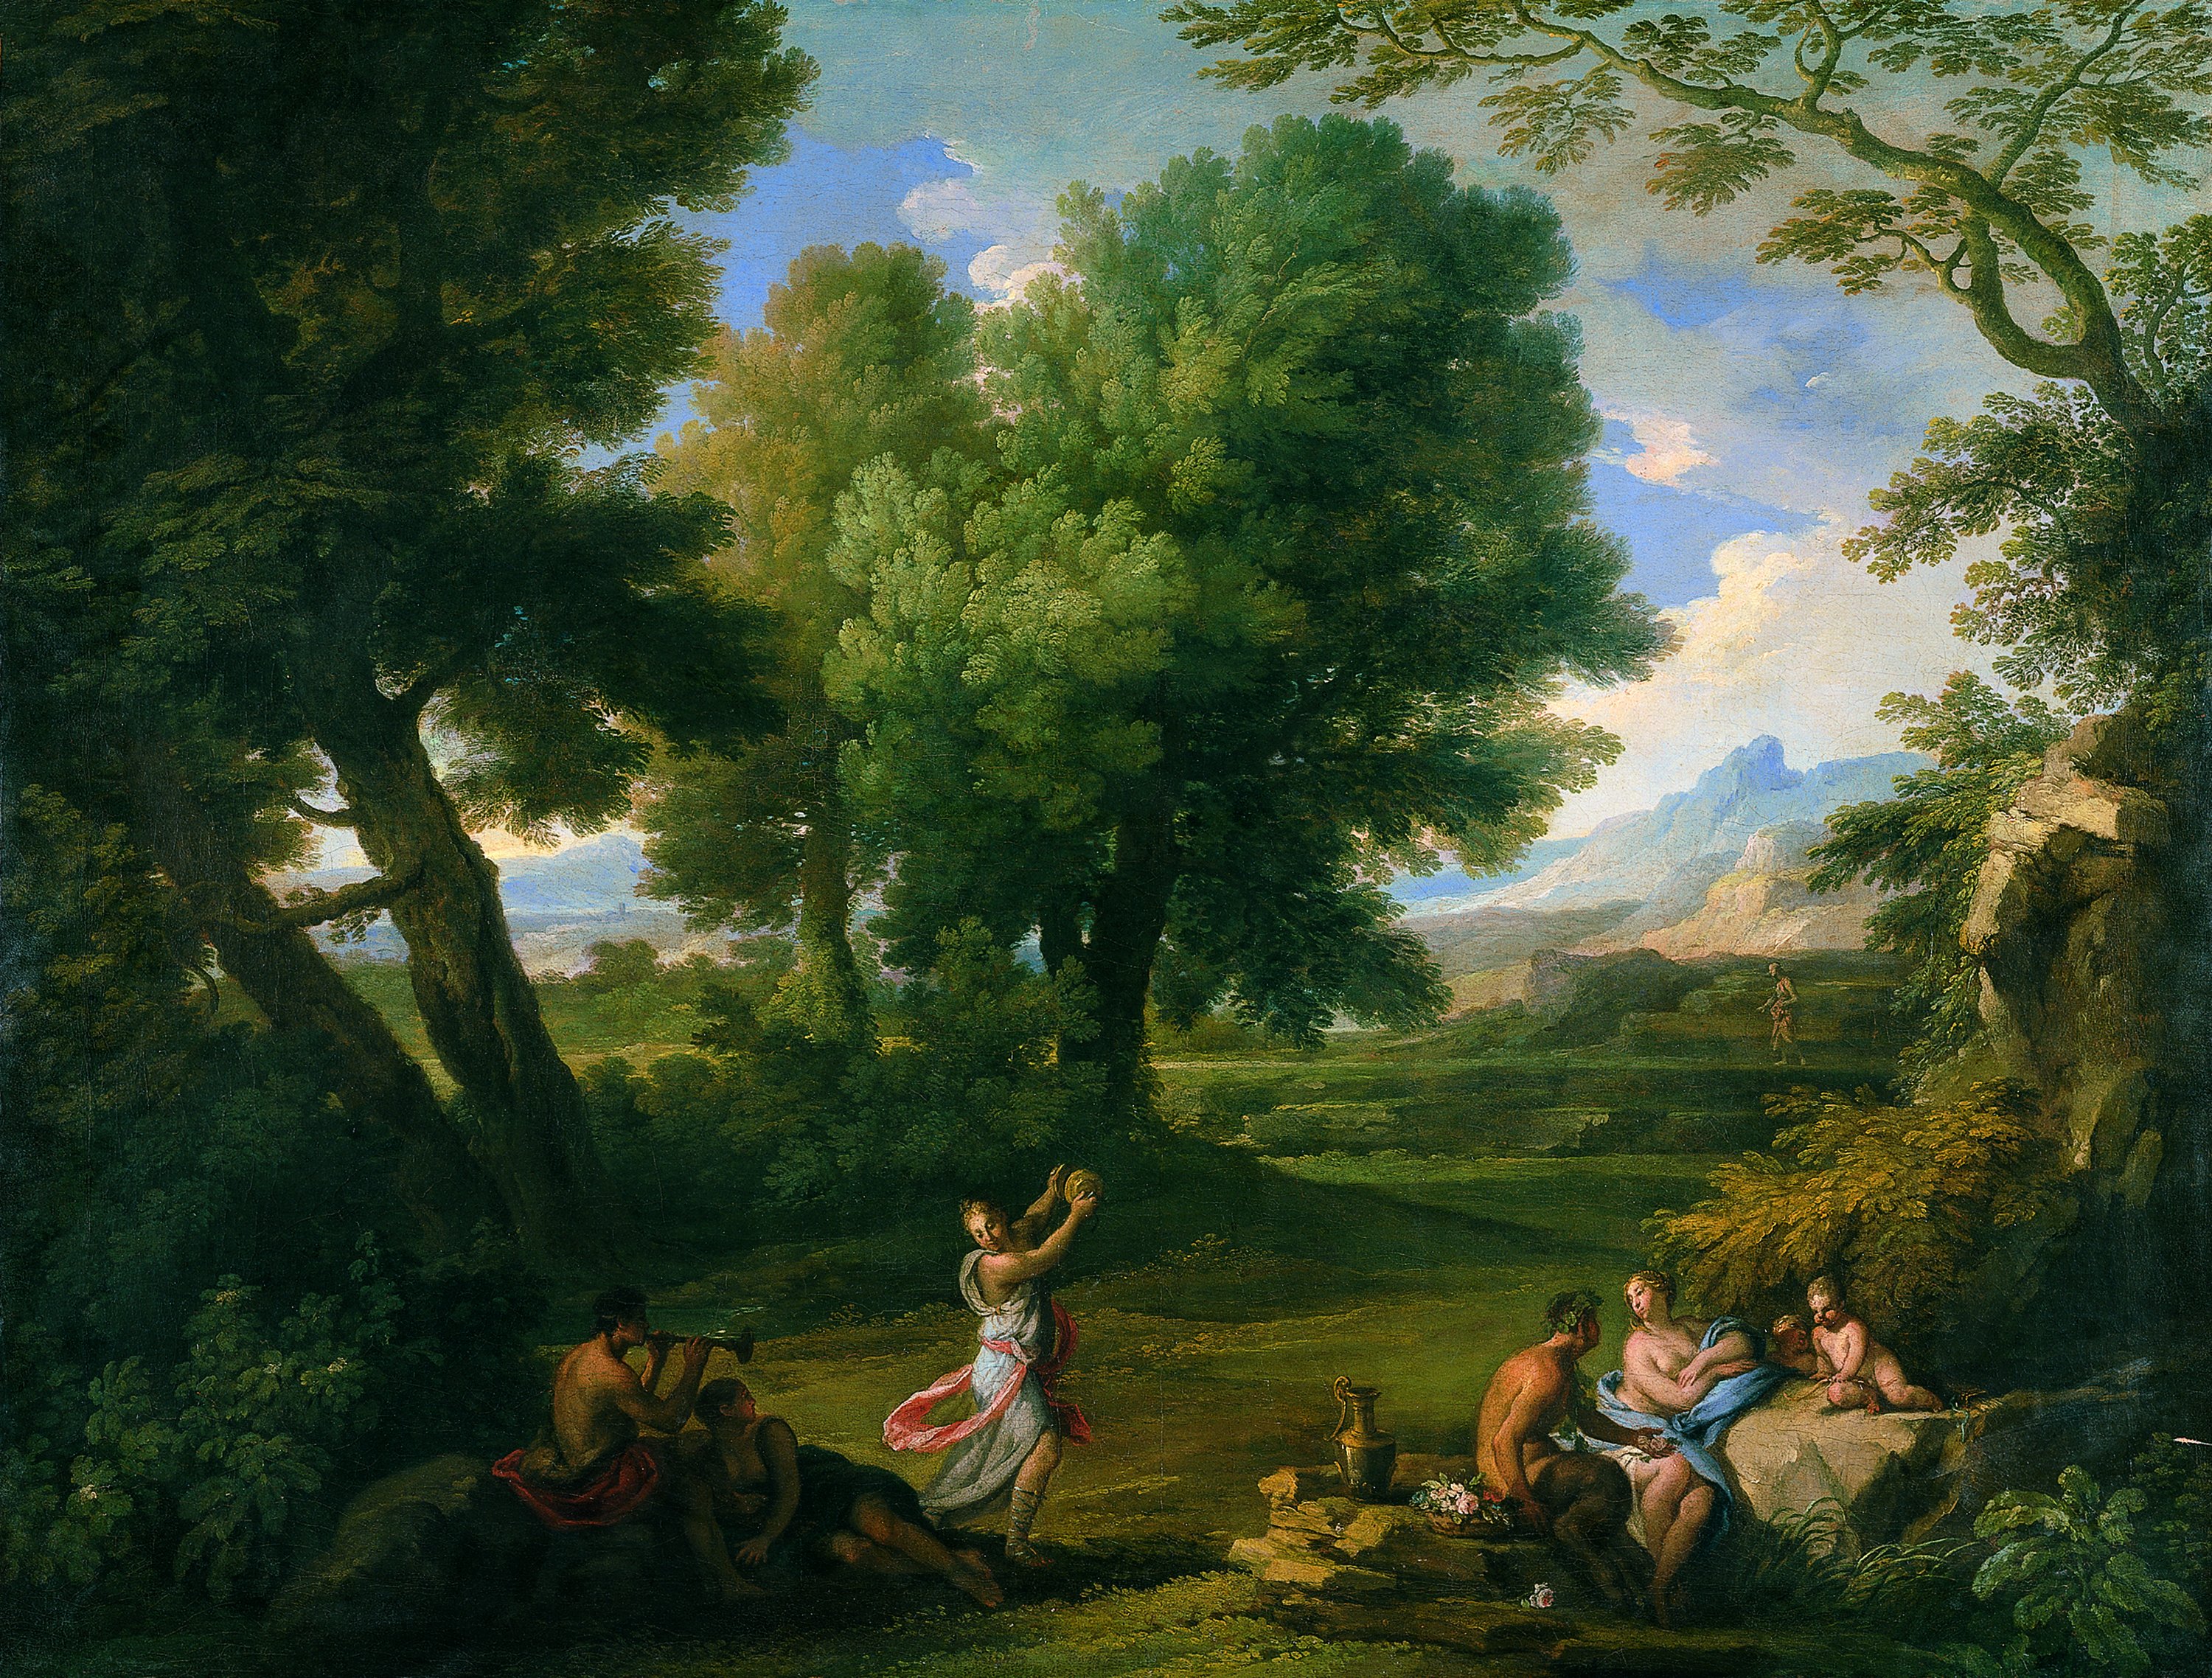 Landscape with Nymphs and Satyrs. Paisaje con ninfas y sátiros